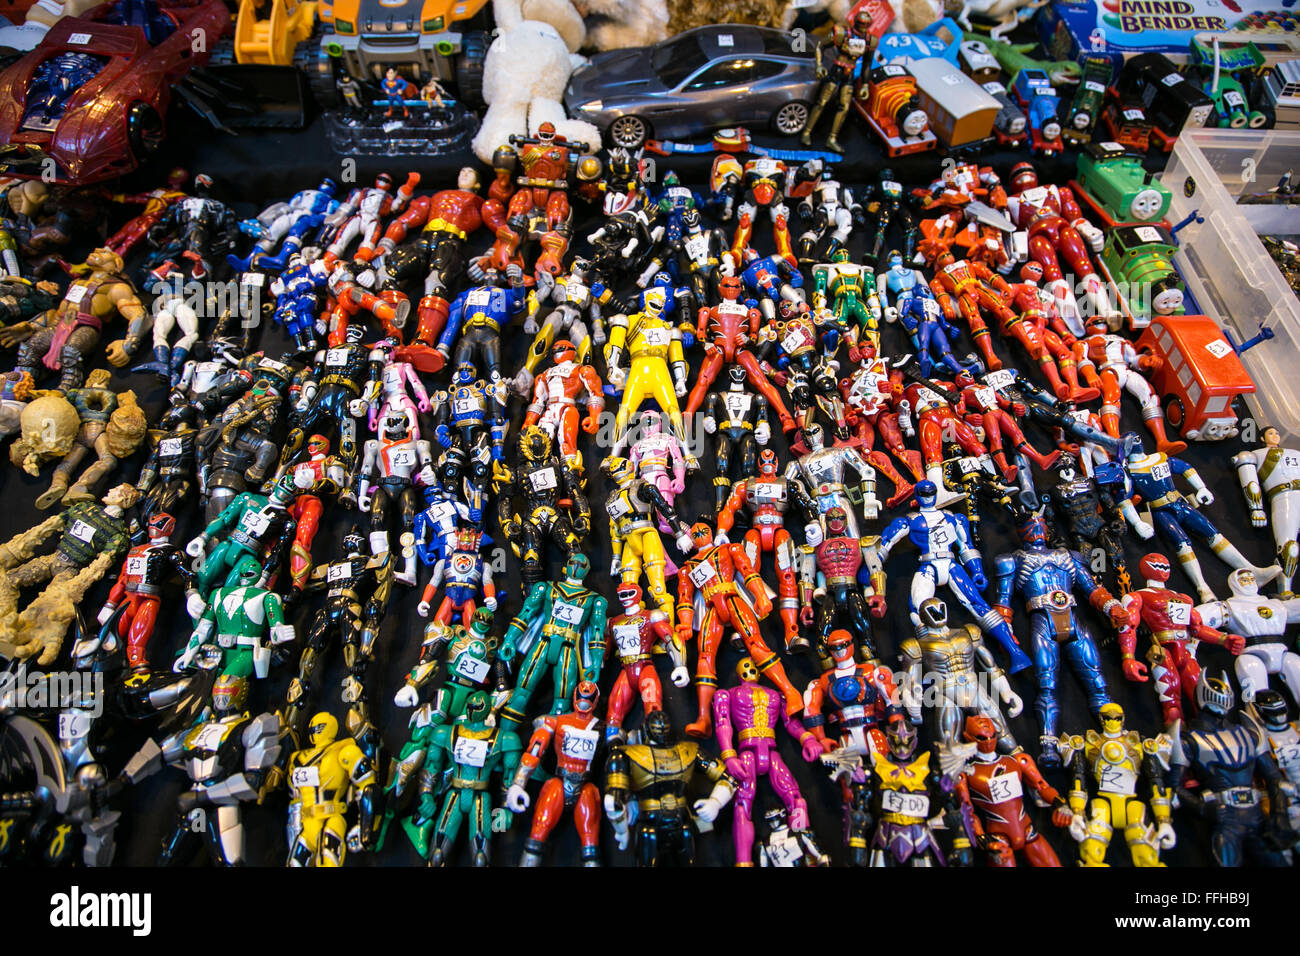 Birmingham, UK. 14th Feb, 2016. Toy Collectors Fair where people can buy antique and new collectable toys. Credit:  steven roe/Alamy Live News Stock Photo